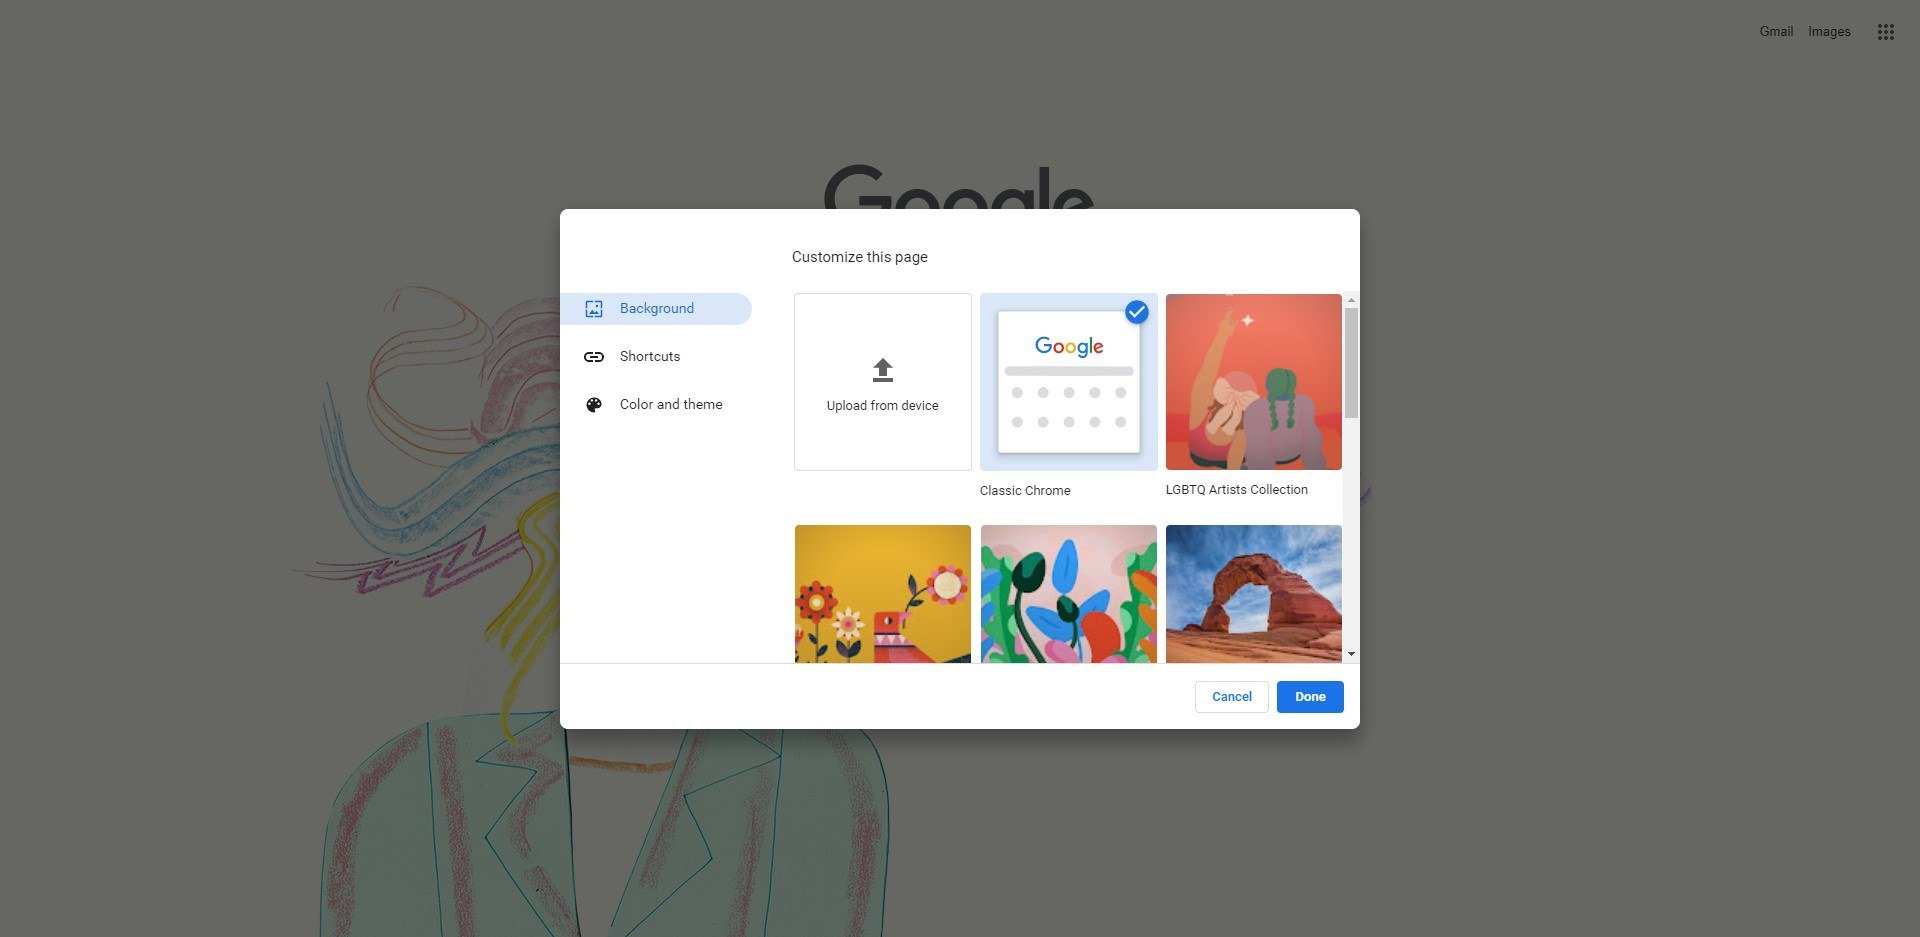 How to Change Your Google Profile Picture on Mobile or PC - Guiding Tech